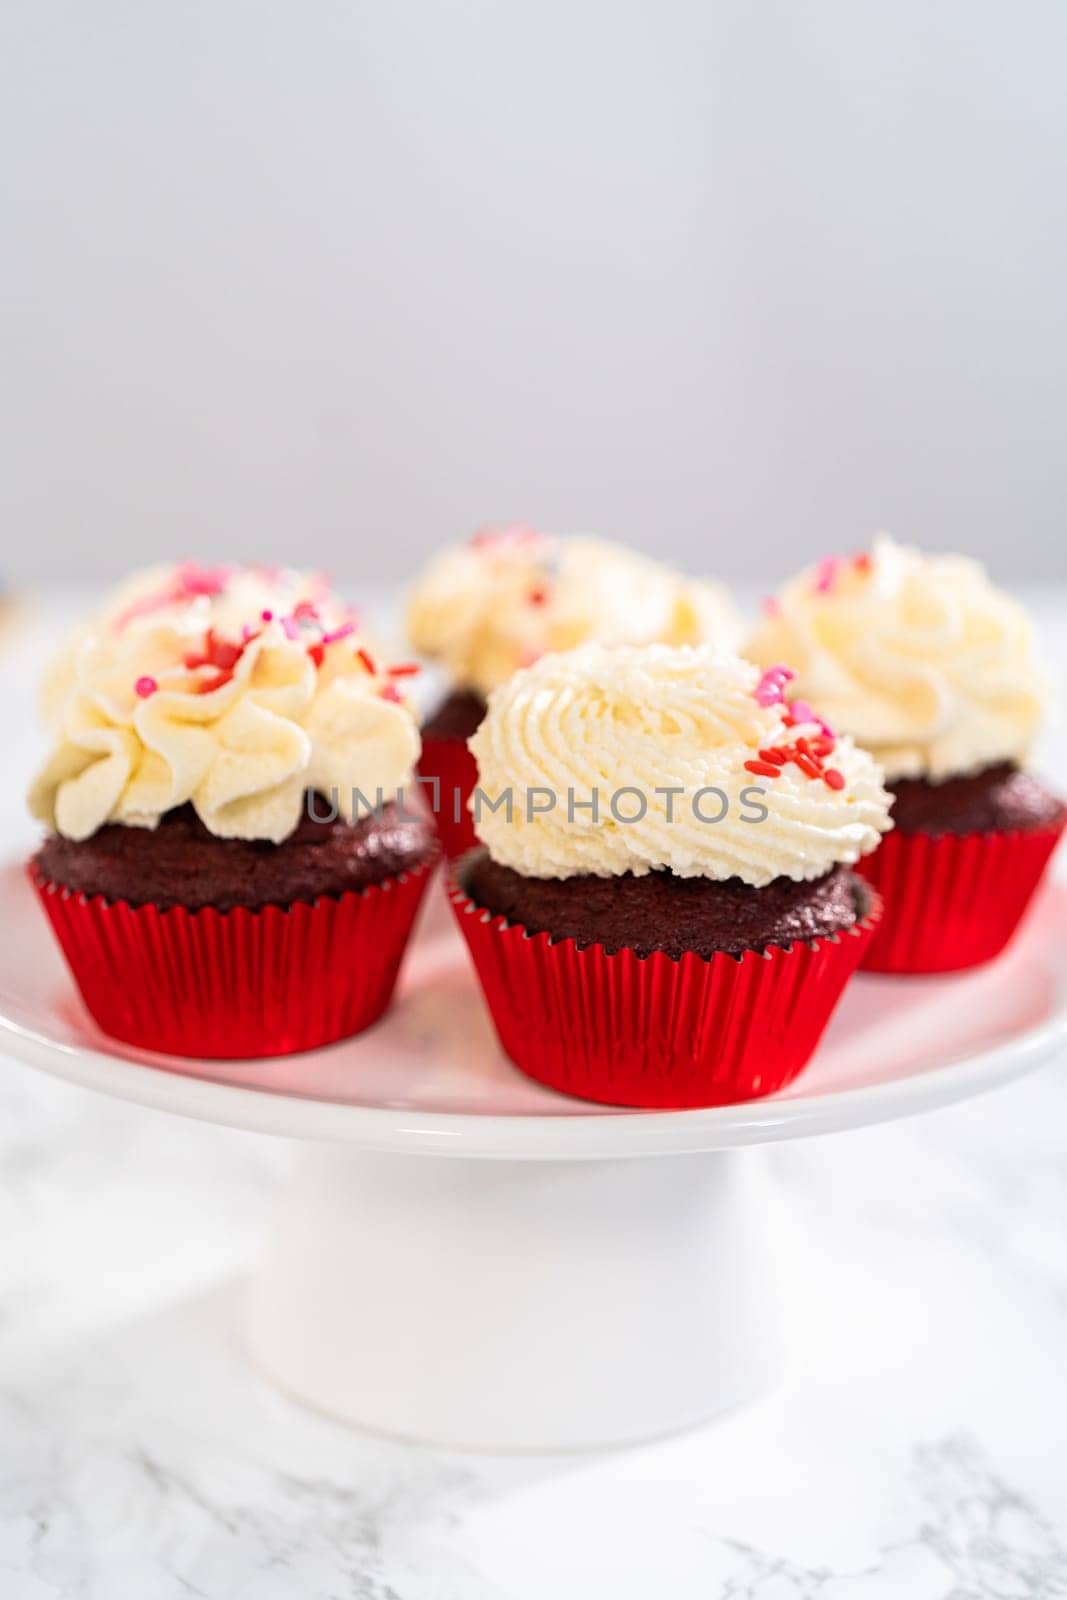 Freshly baked velvet cupcakes with white chocolate ganache frosting decorated with sprinkles.